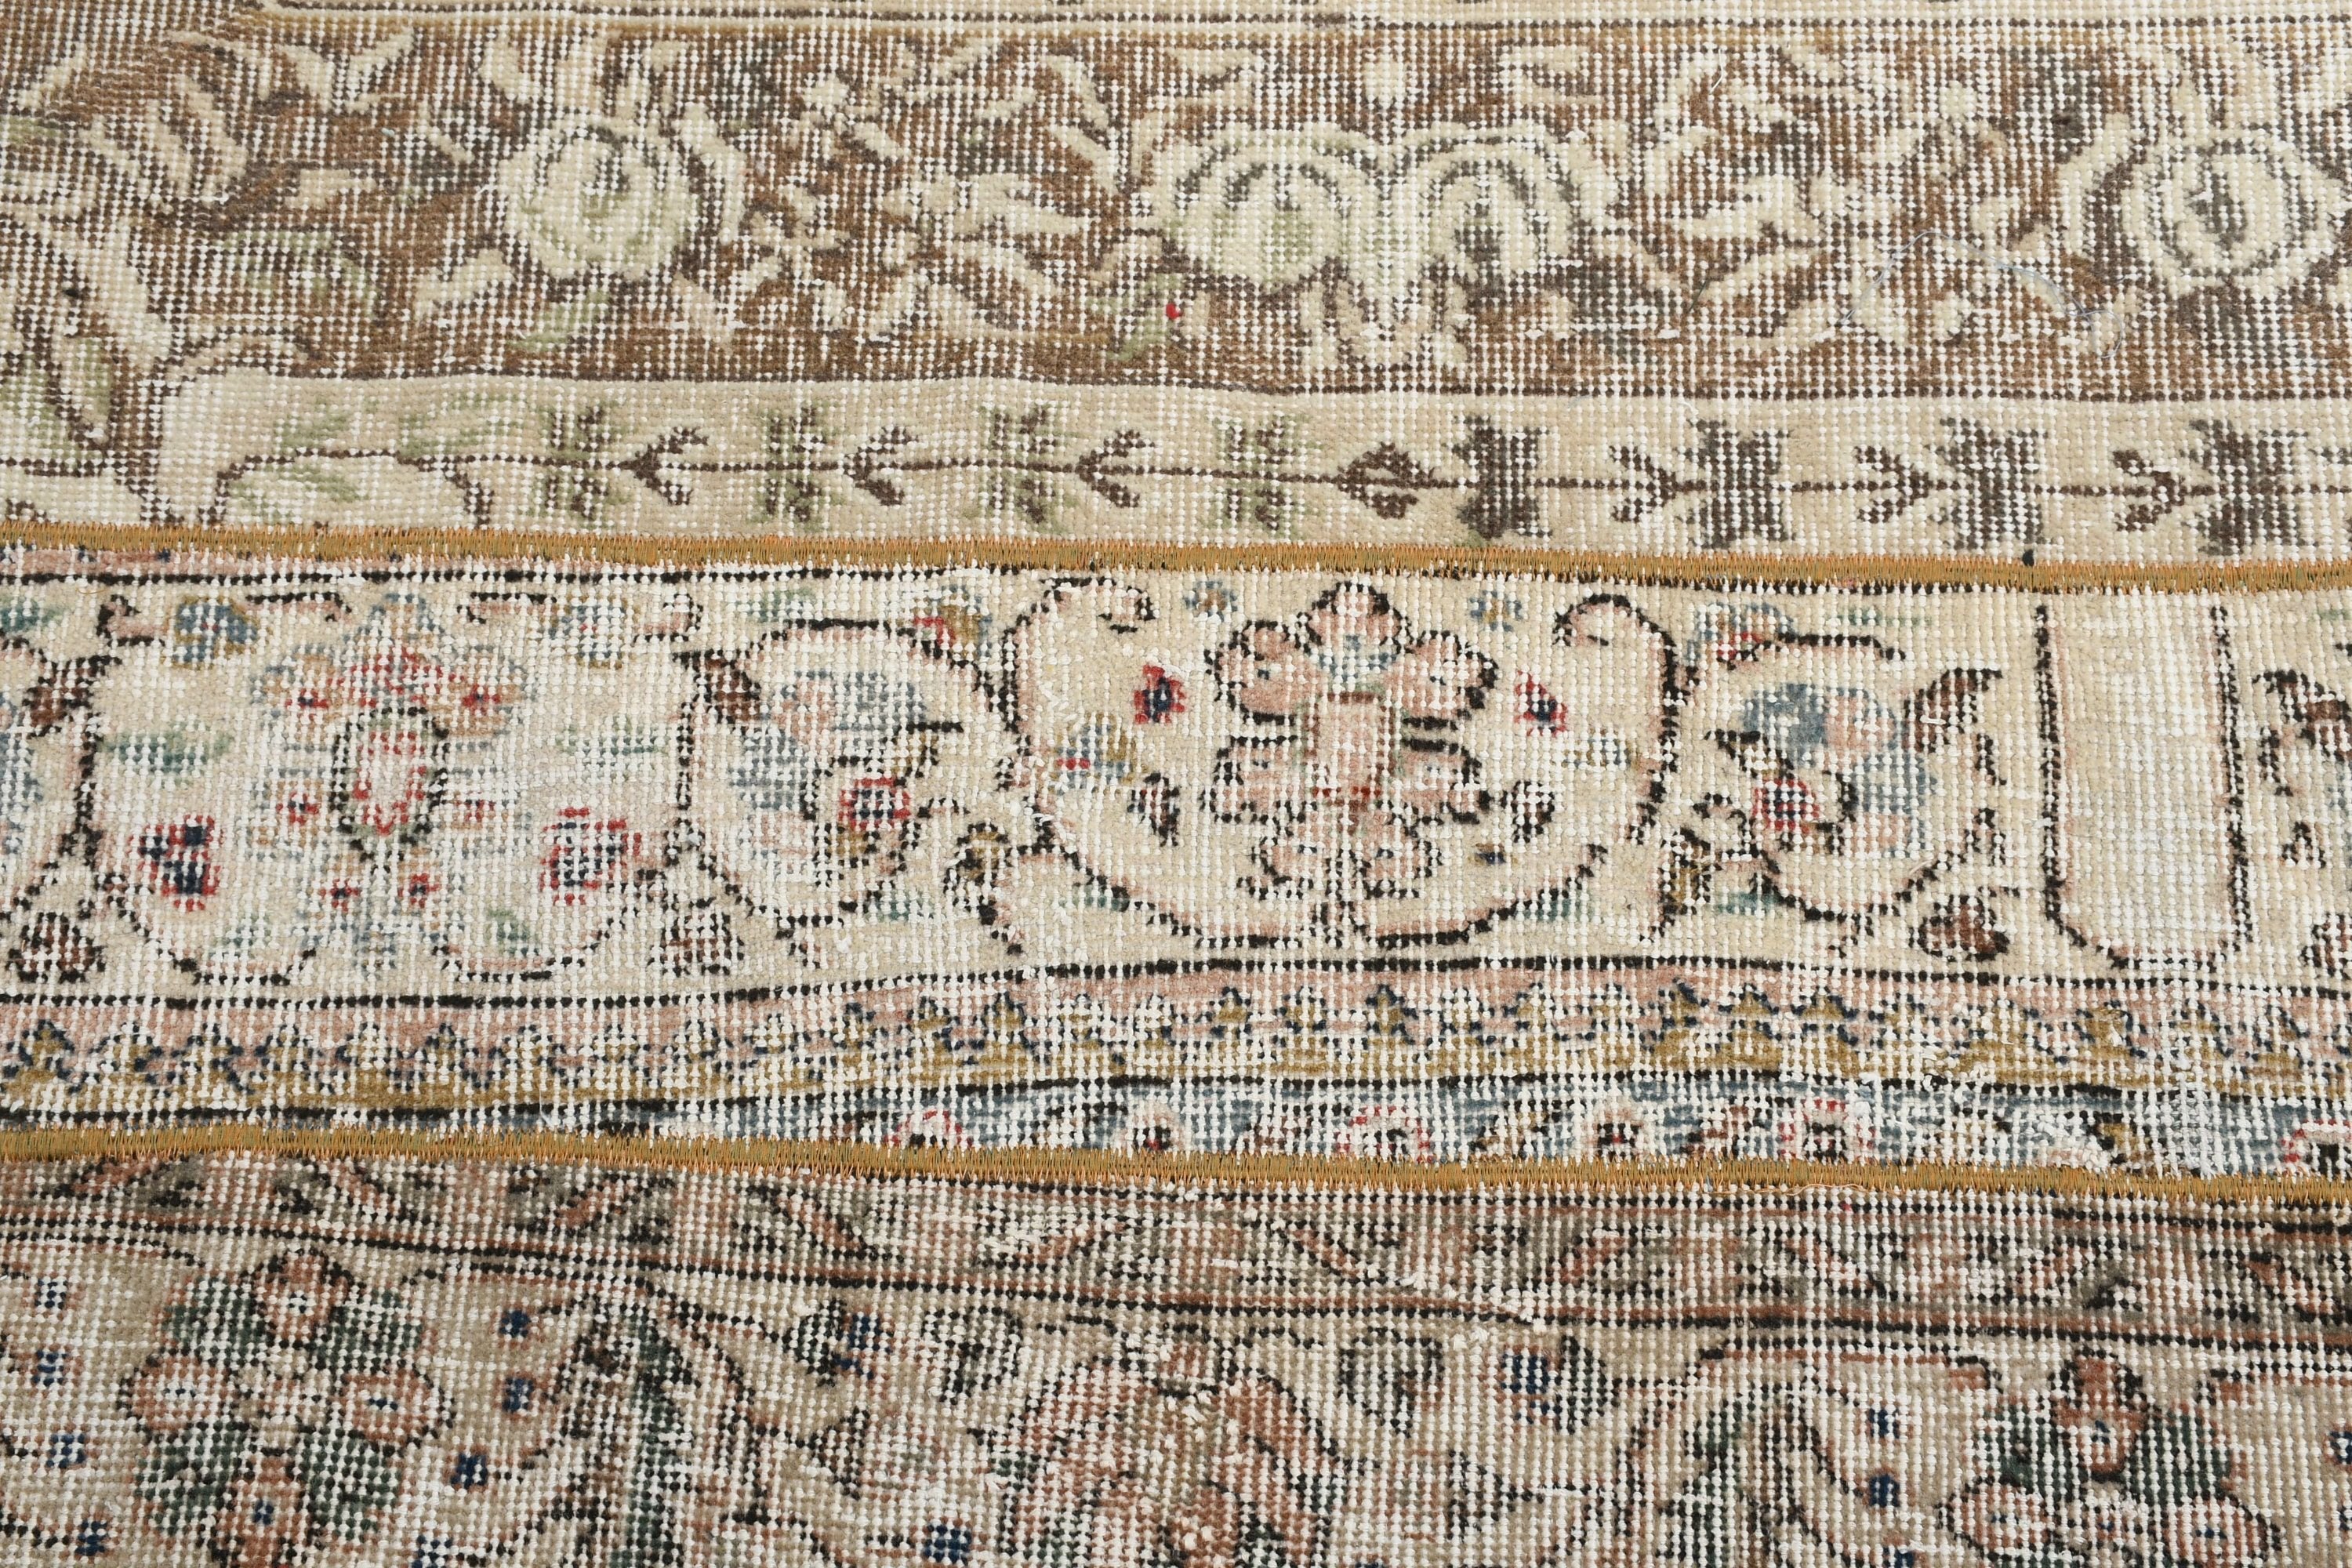 Turkish Rugs, Home Decor Rugs, Beige Moroccan Rugs, Entry Rugs, Kitchen Rug, 2.5x4.6 ft Small Rugs, Vintage Rugs, Pale Rugs, Wool Rug